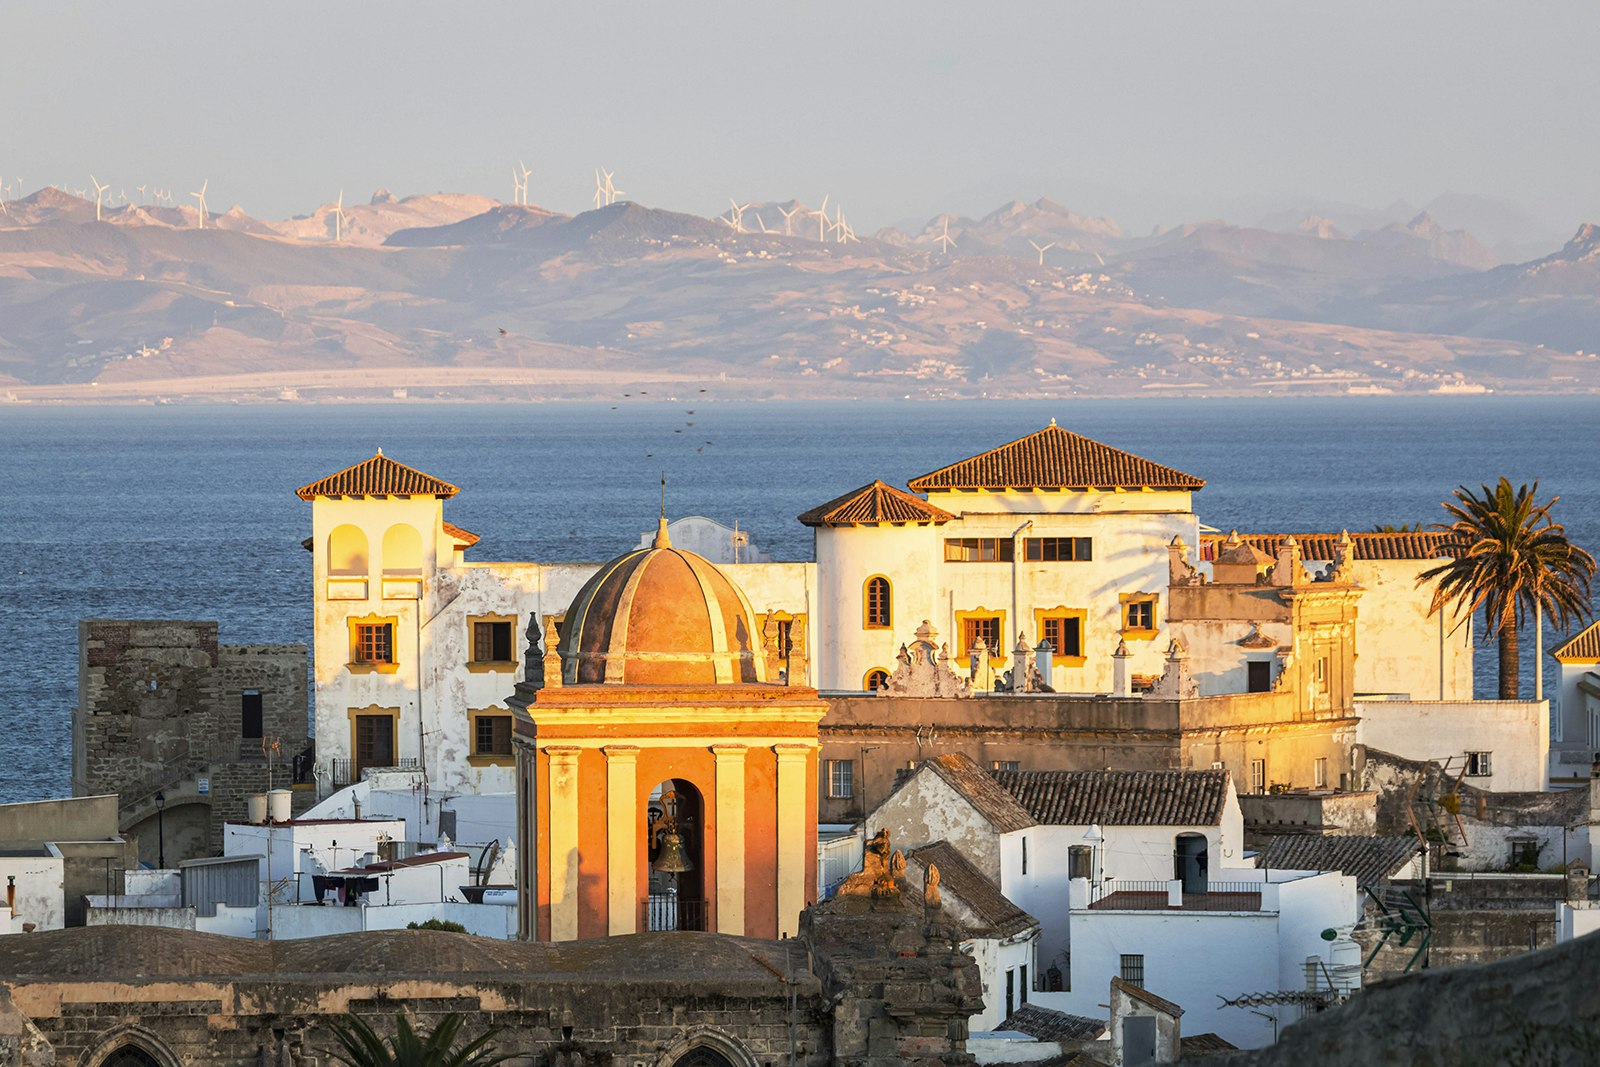 The historic center of Tarifa at sunset, with the ocean and a hill dotted with windfarms in the background. Cádiz, Spain.